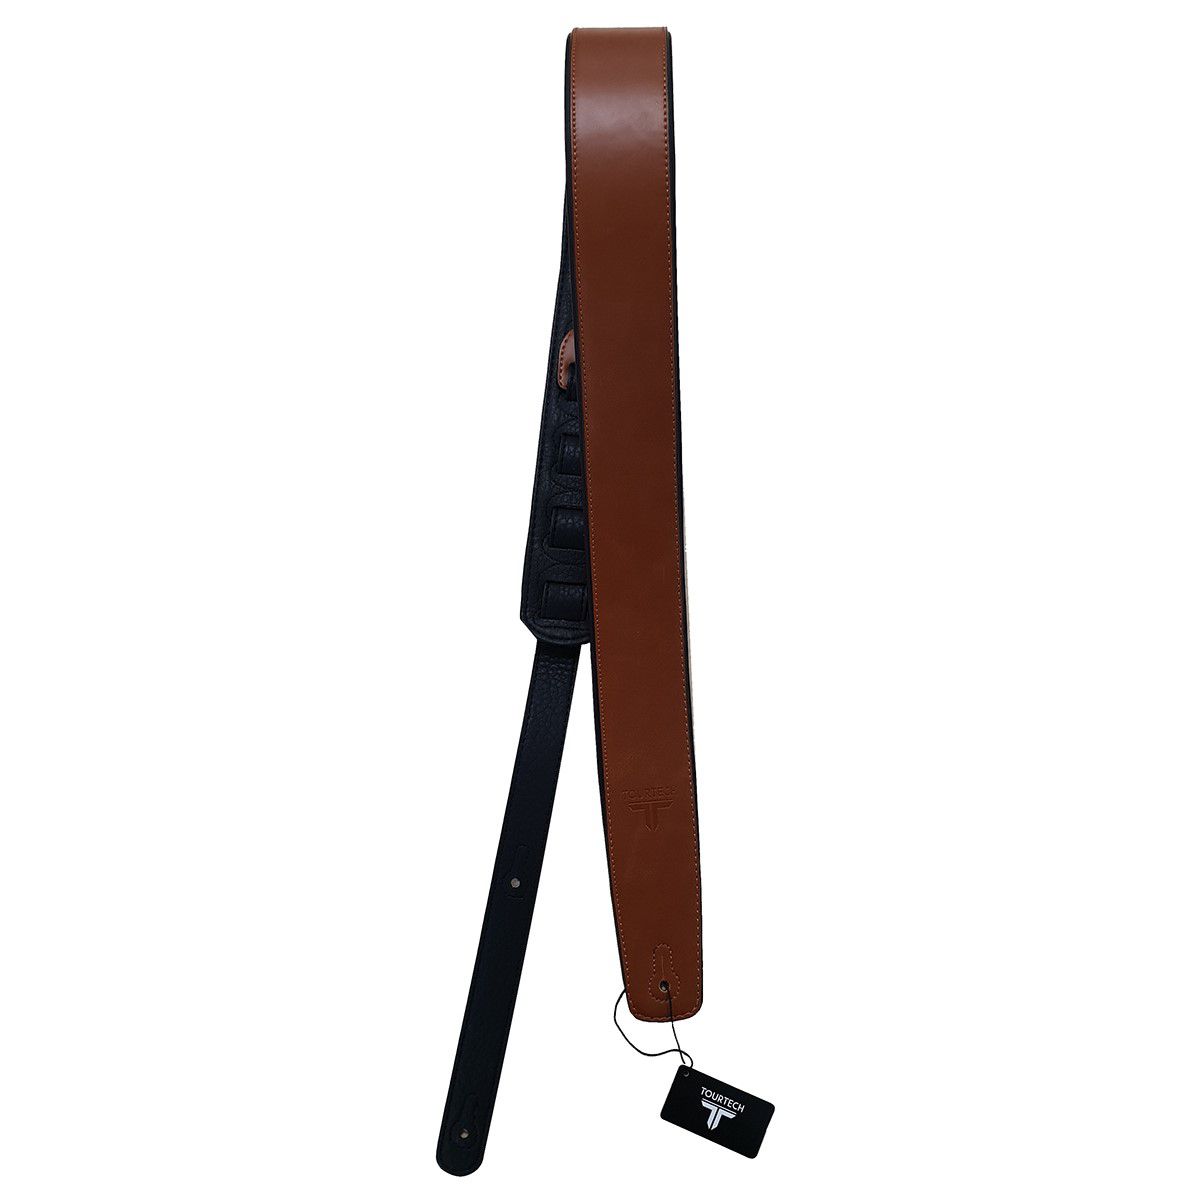 An image of TOURTECH Guitar Strap, Large, Brown - Gift for a Guitarist